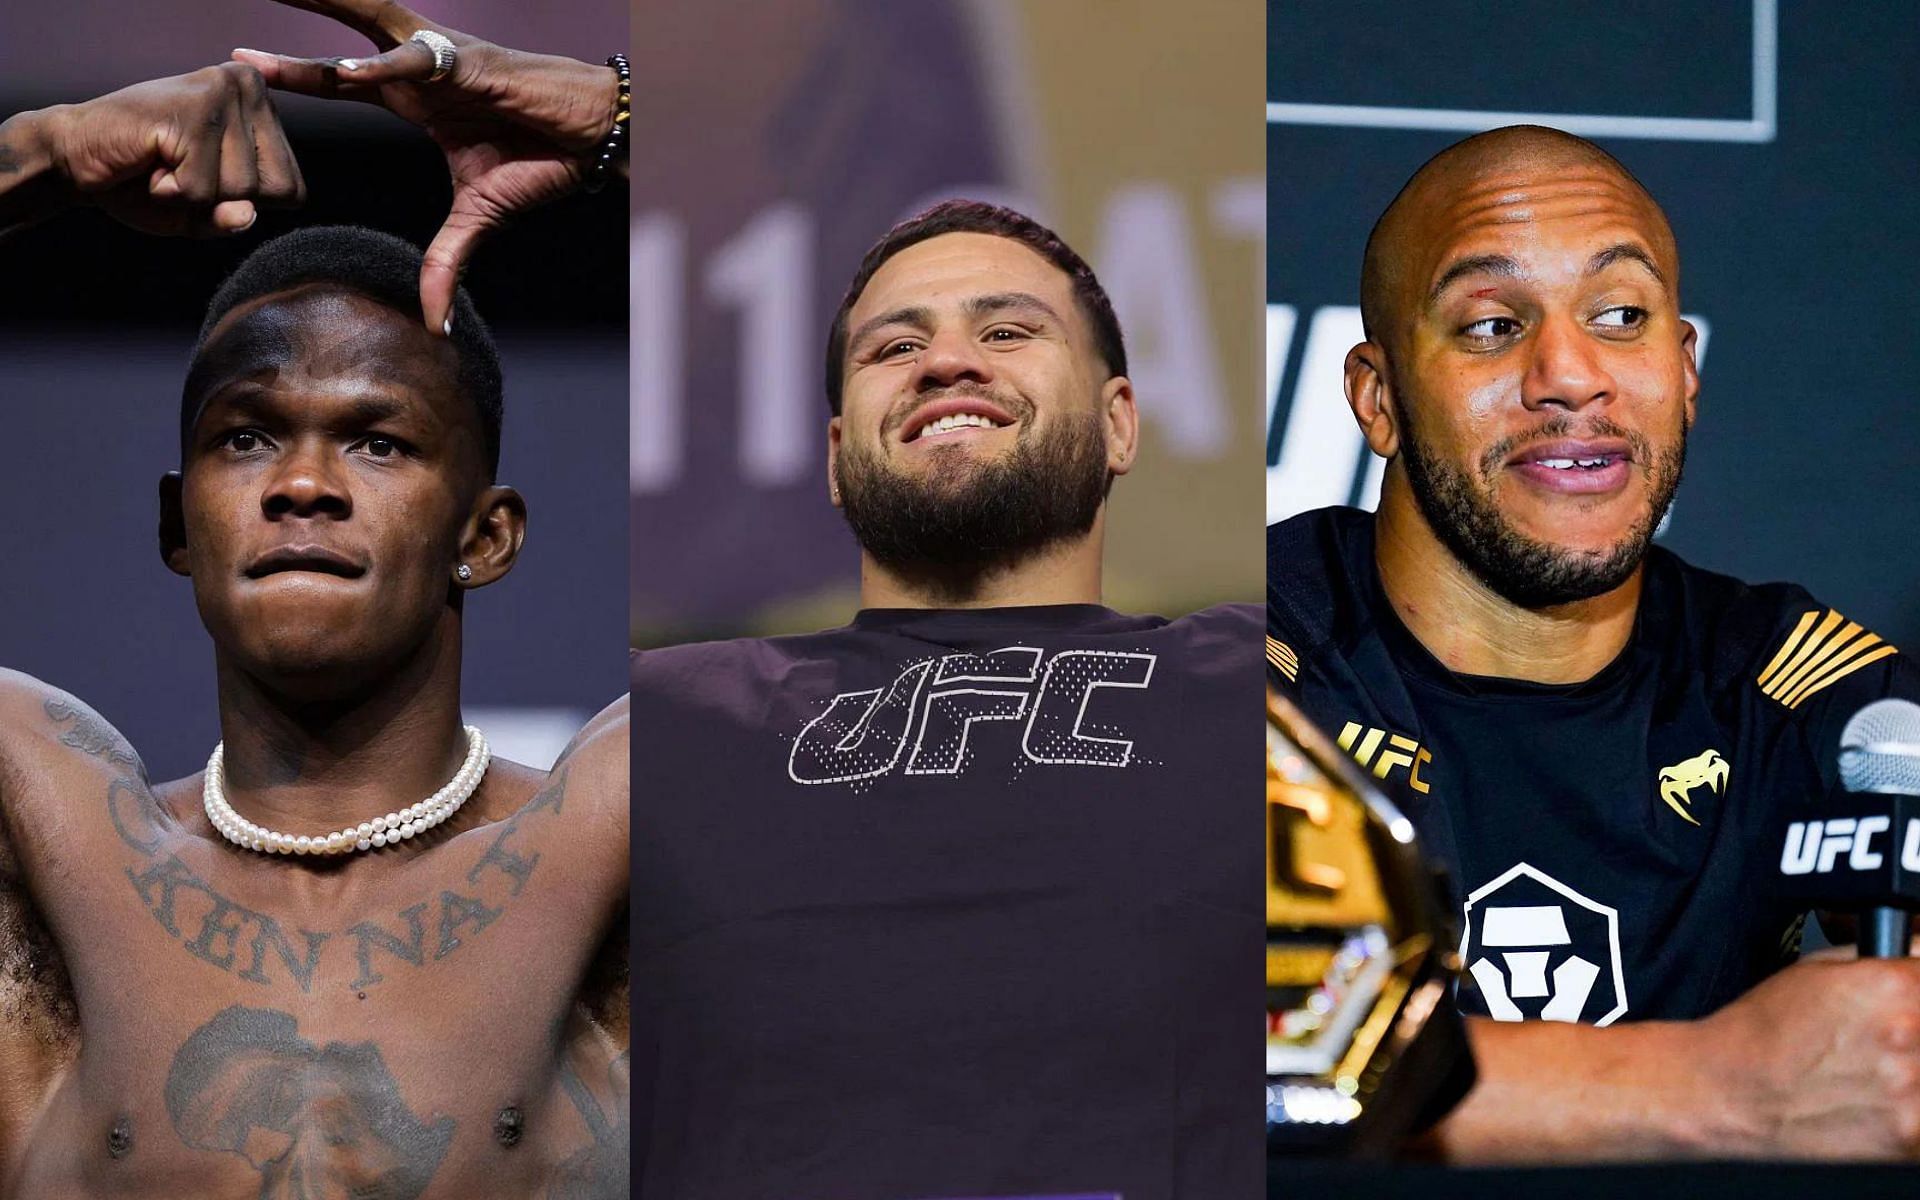 Israel Adesanya (left) explains how Tai Tuivasa (center) could pull off a surprise win against Ciryl Gane (right) at UFC Paris